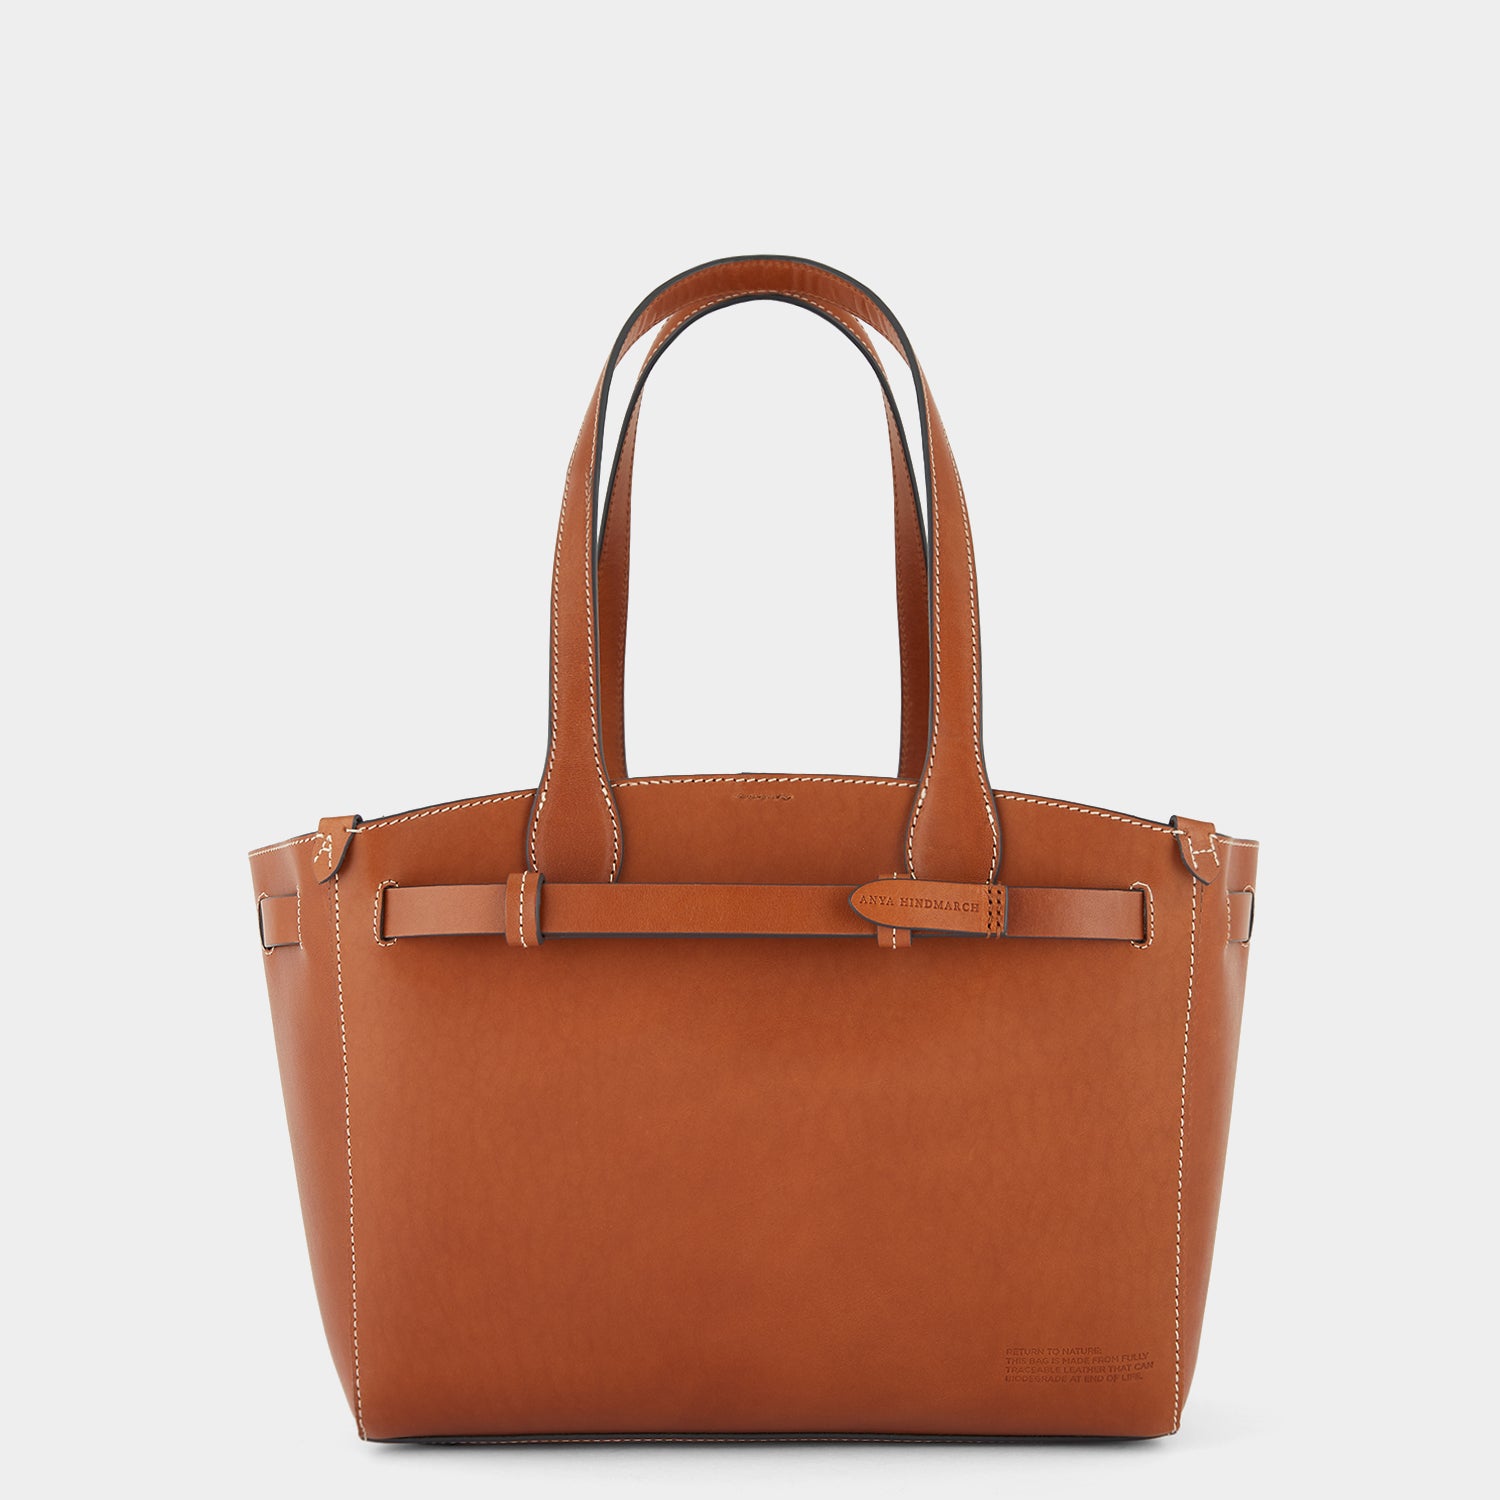 Return to Nature Small Tote -

                  
                    Compostable Leather in Tan -
                  

                  Anya Hindmarch UK
